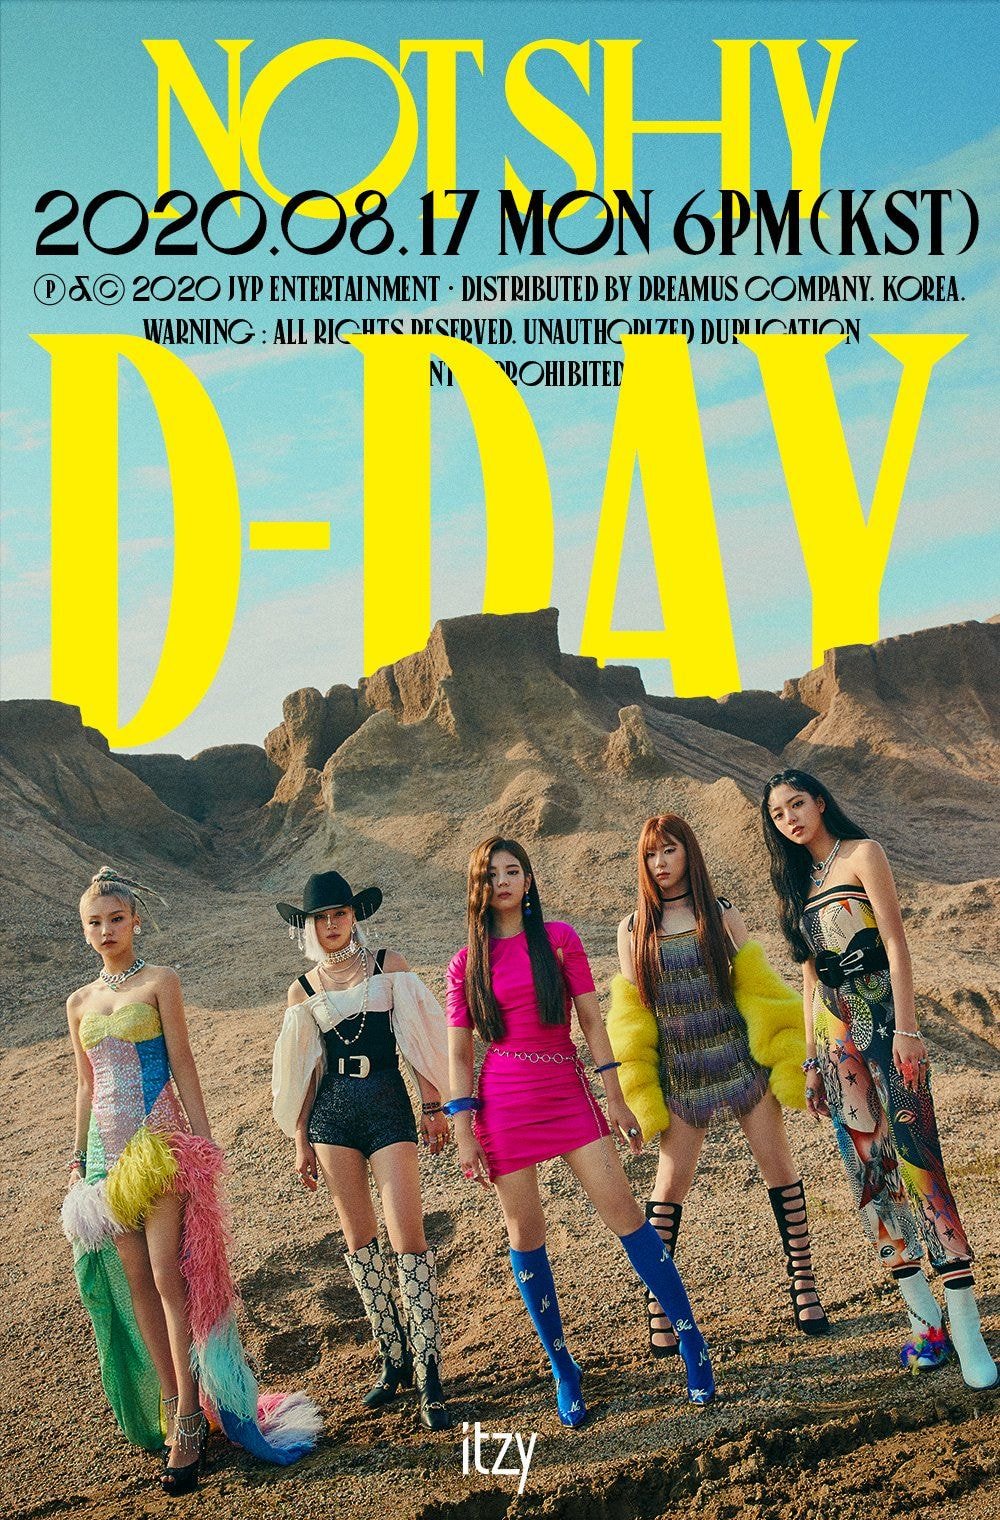 ITZY <Not Shy> D-DAY POSTER TITLE TRACK “Not Shy”